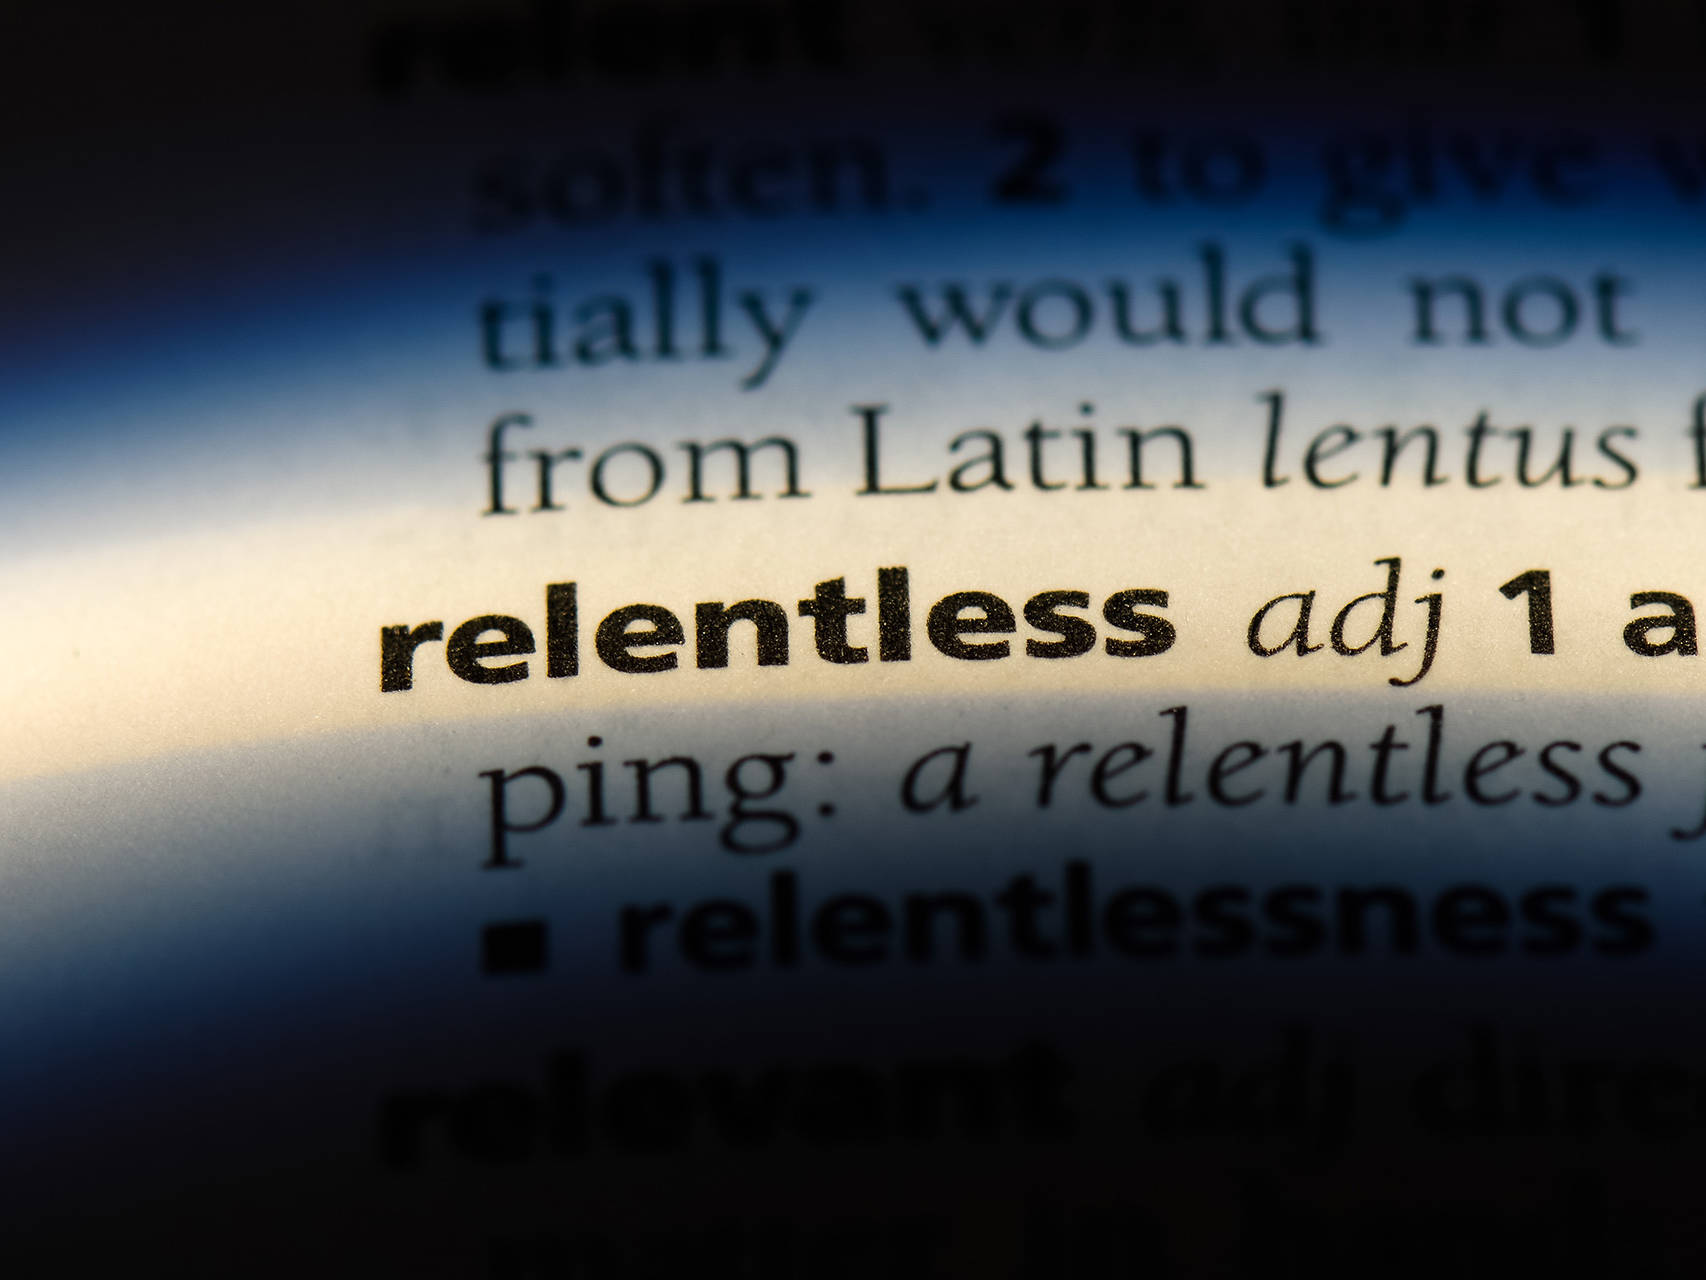 Dictionary definition of the word relentless